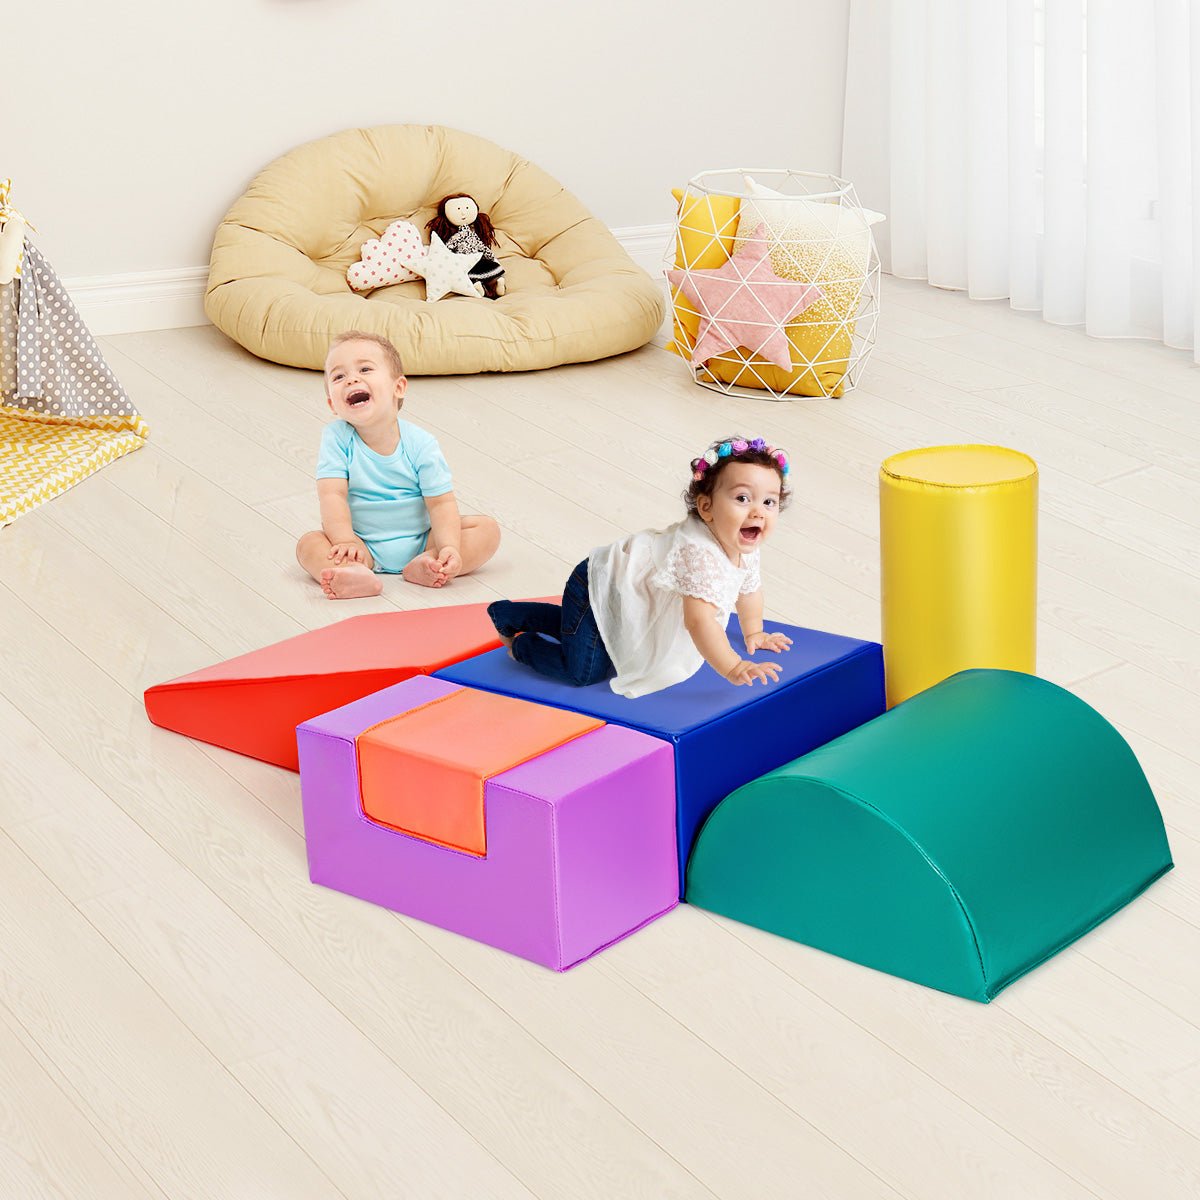 Crawl, Climb, and Play with Our Red Foam Block Playset